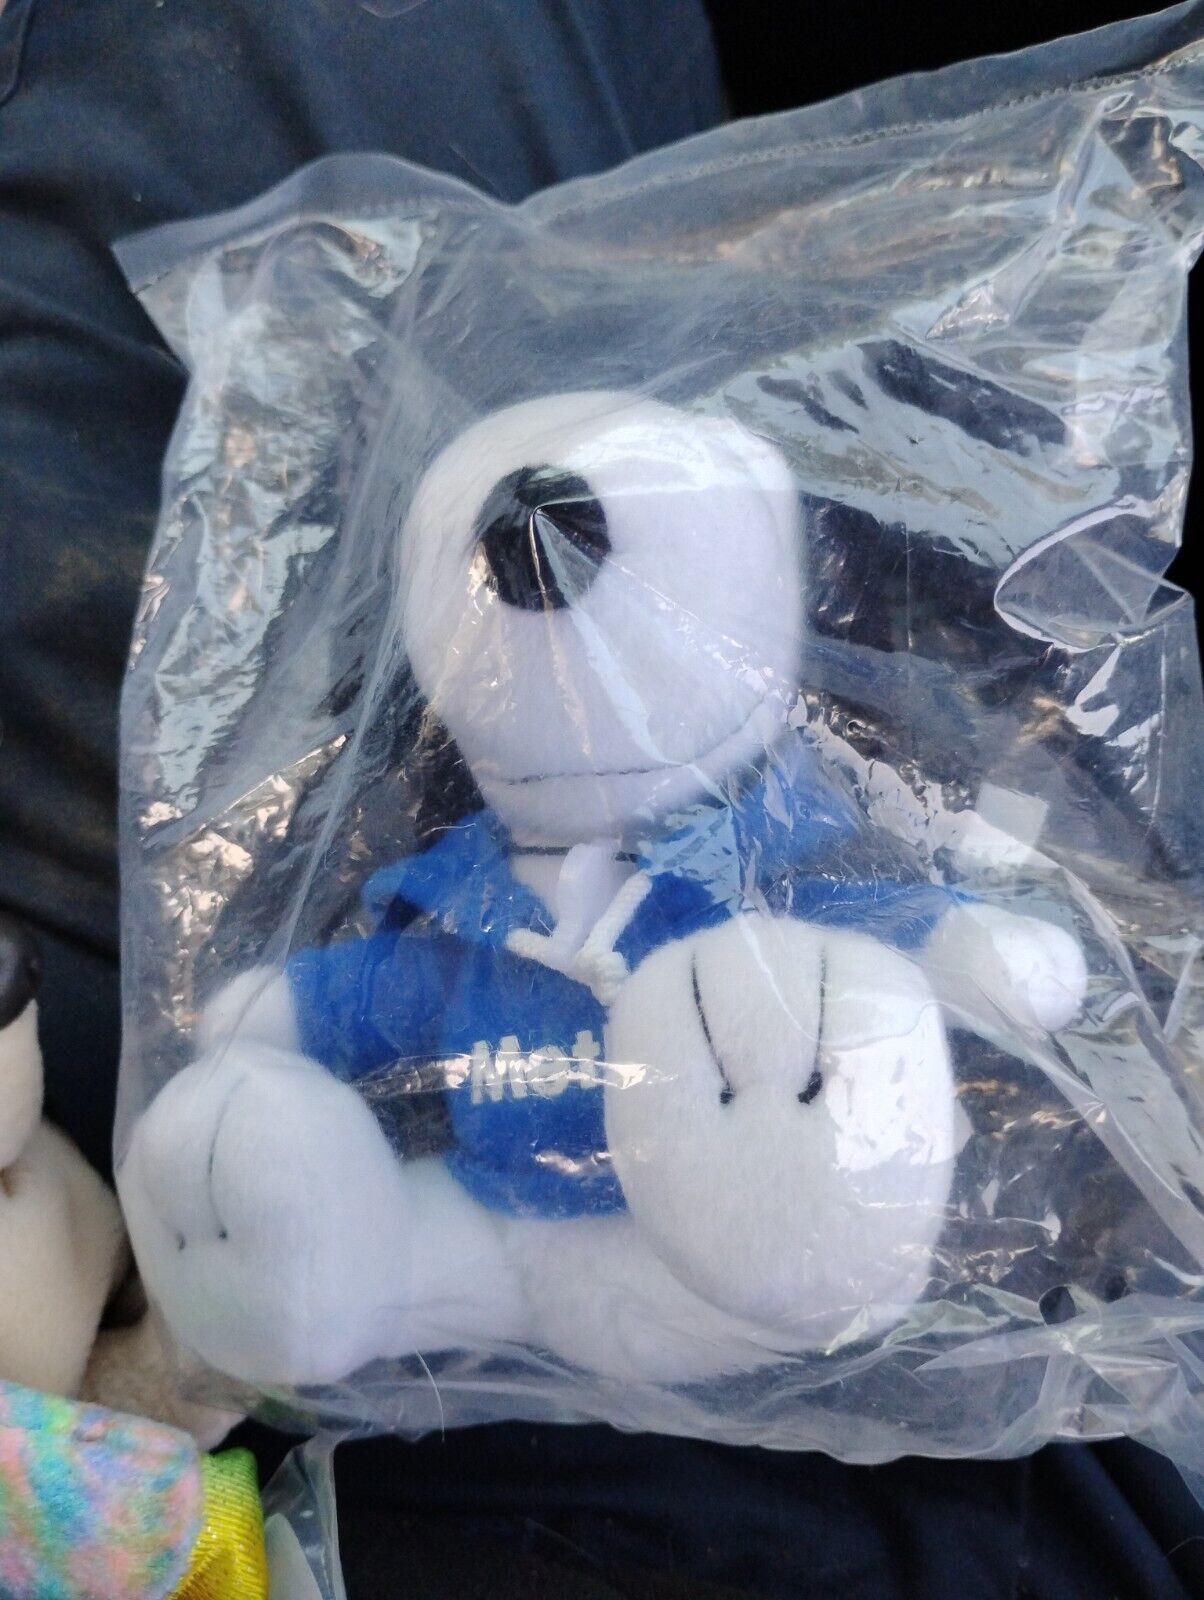 metLife Peanuts Snoopy Soccer ⚽️ Player Plush Toy In Sealed Bag New RARE